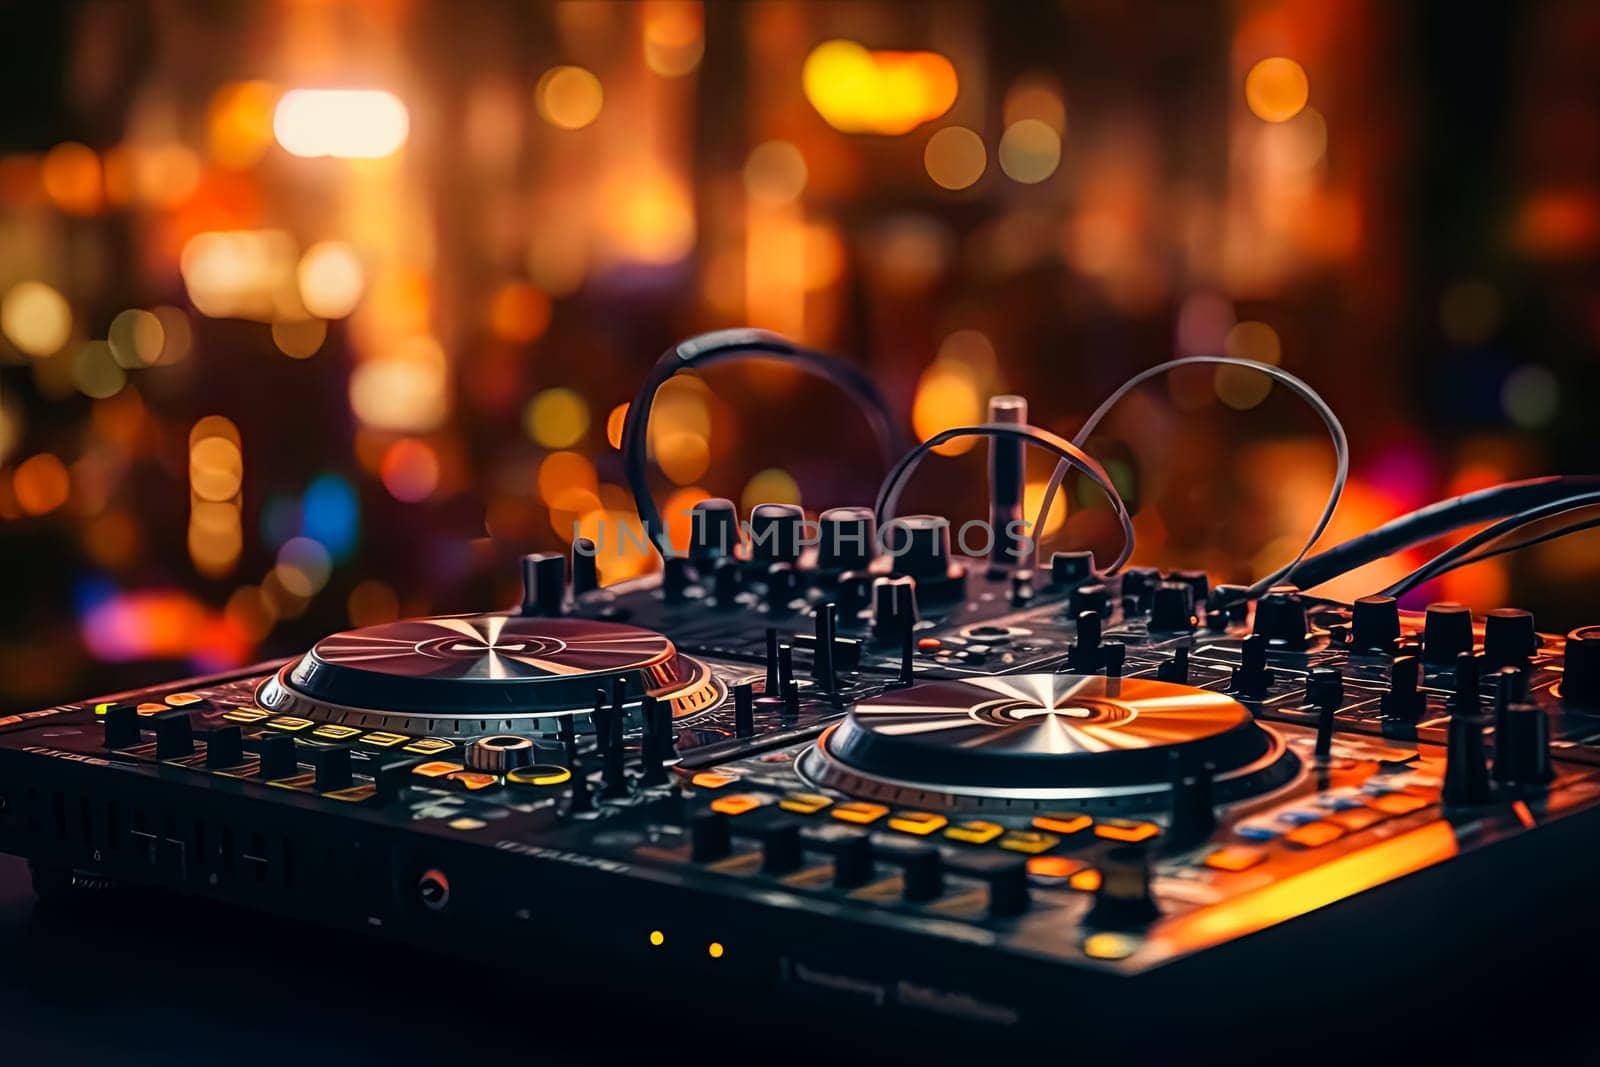 A set of DJ equipment stands against a vibrant orange backdrop, radiating energy and setting the stage for an electrifying performance.